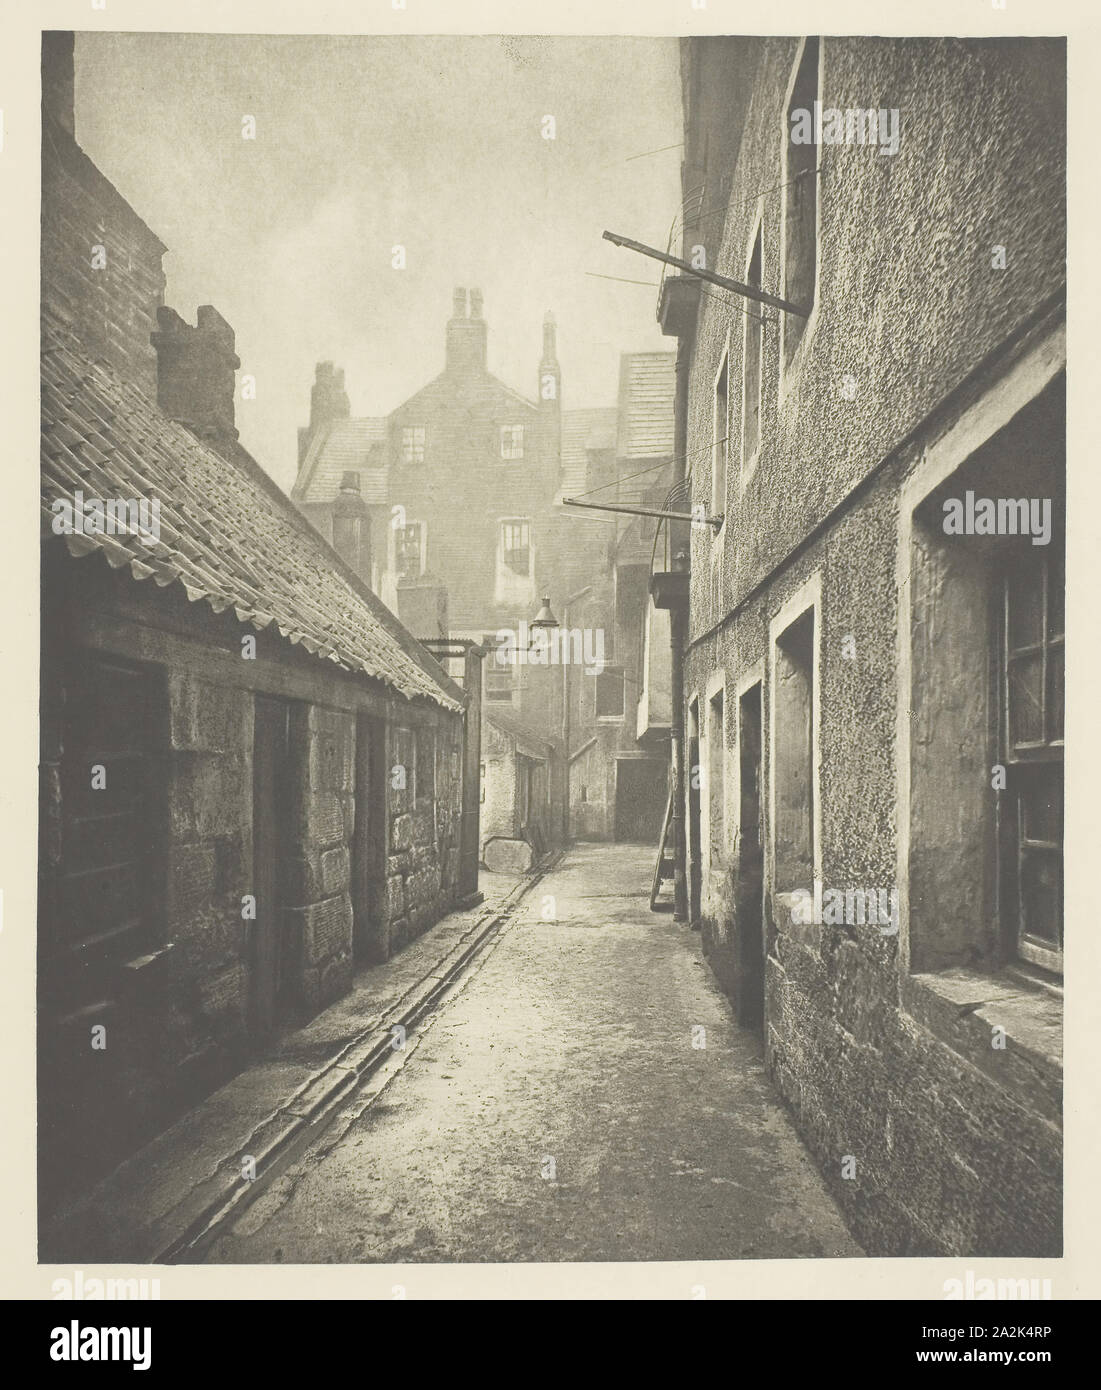 Close No. 115 High Street, 1868, Thomas Annan, Scottish, 1829–1887, Scotland, Photogravure, plate 7 from the book 'The Old Closes & Streets of Glasgow' (1900), 21.1 x 17.6 cm (image), 38.2 x 27.8 cm (paper Stock Photo